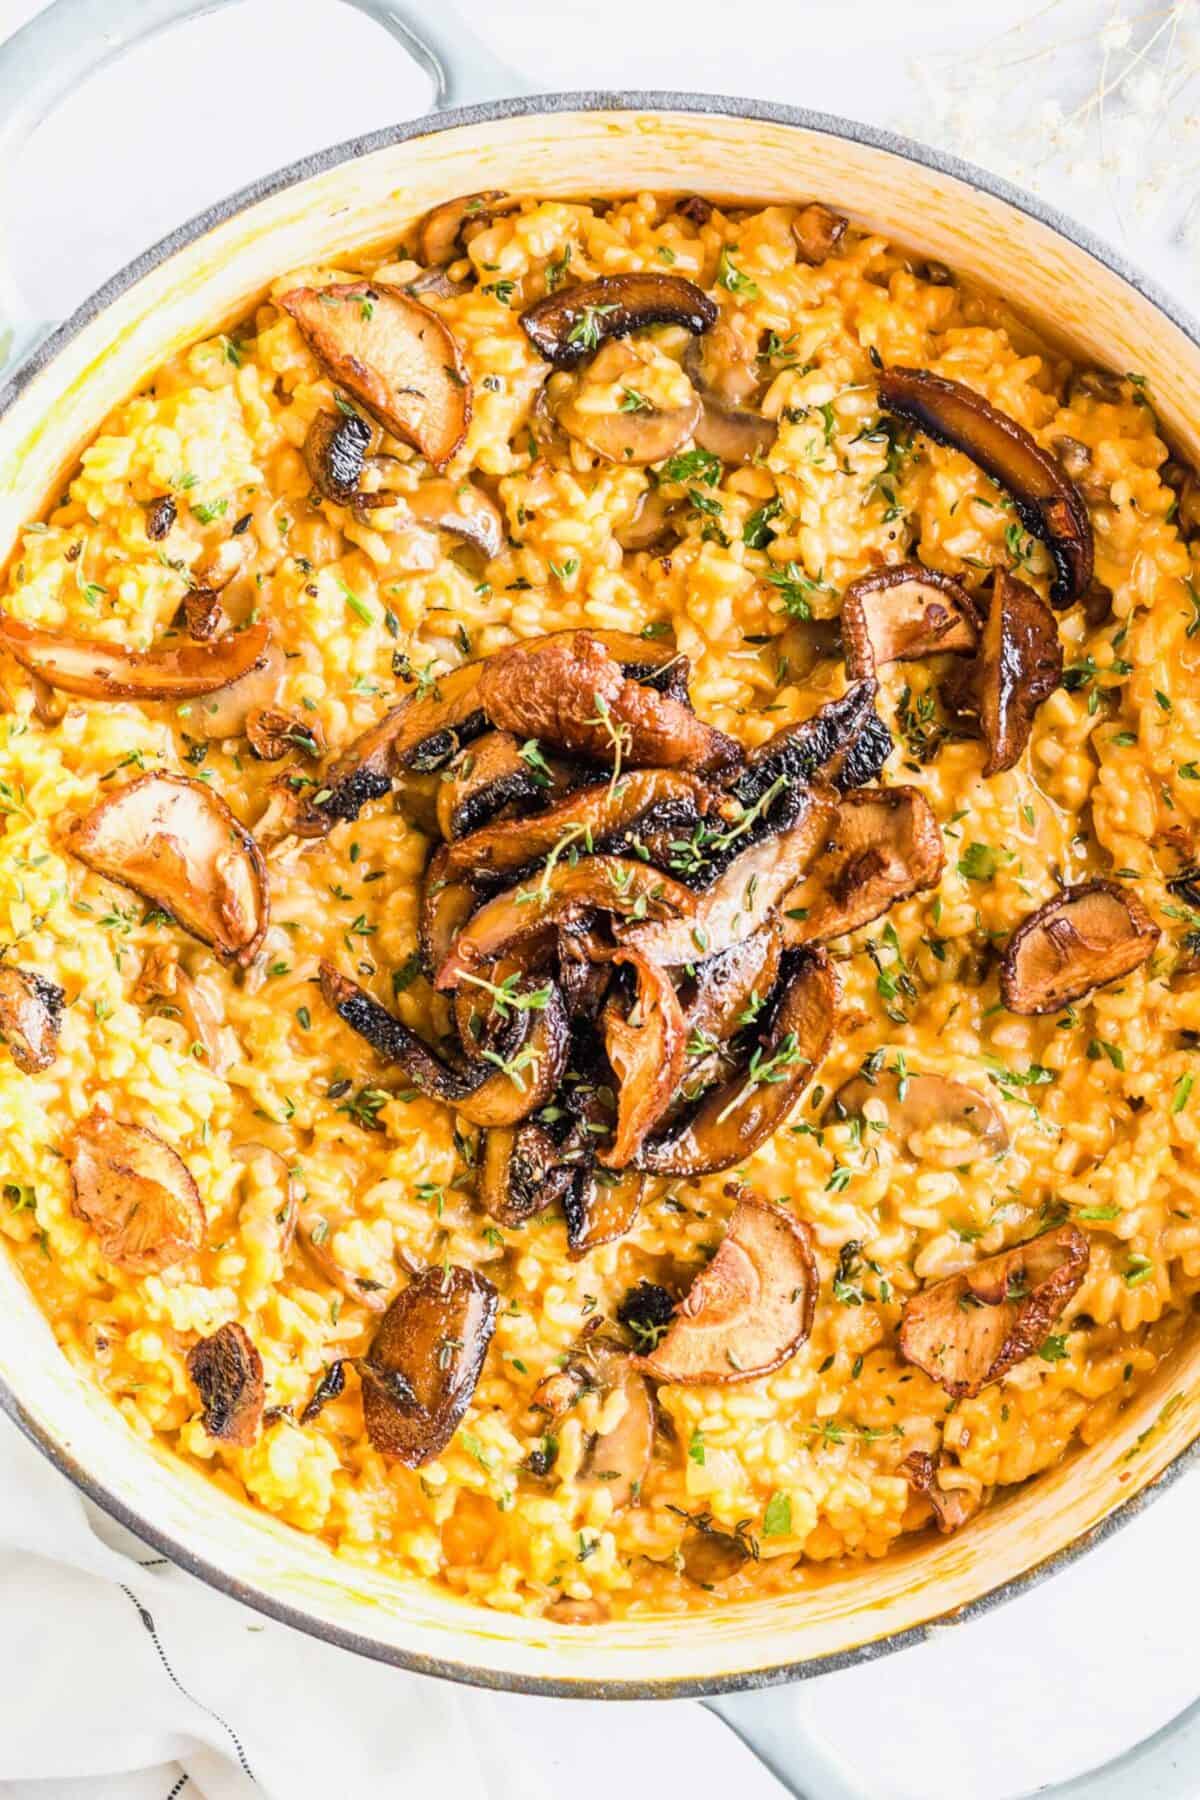 Overhead view of a pot of risotto, topped with mushrooms and parsley